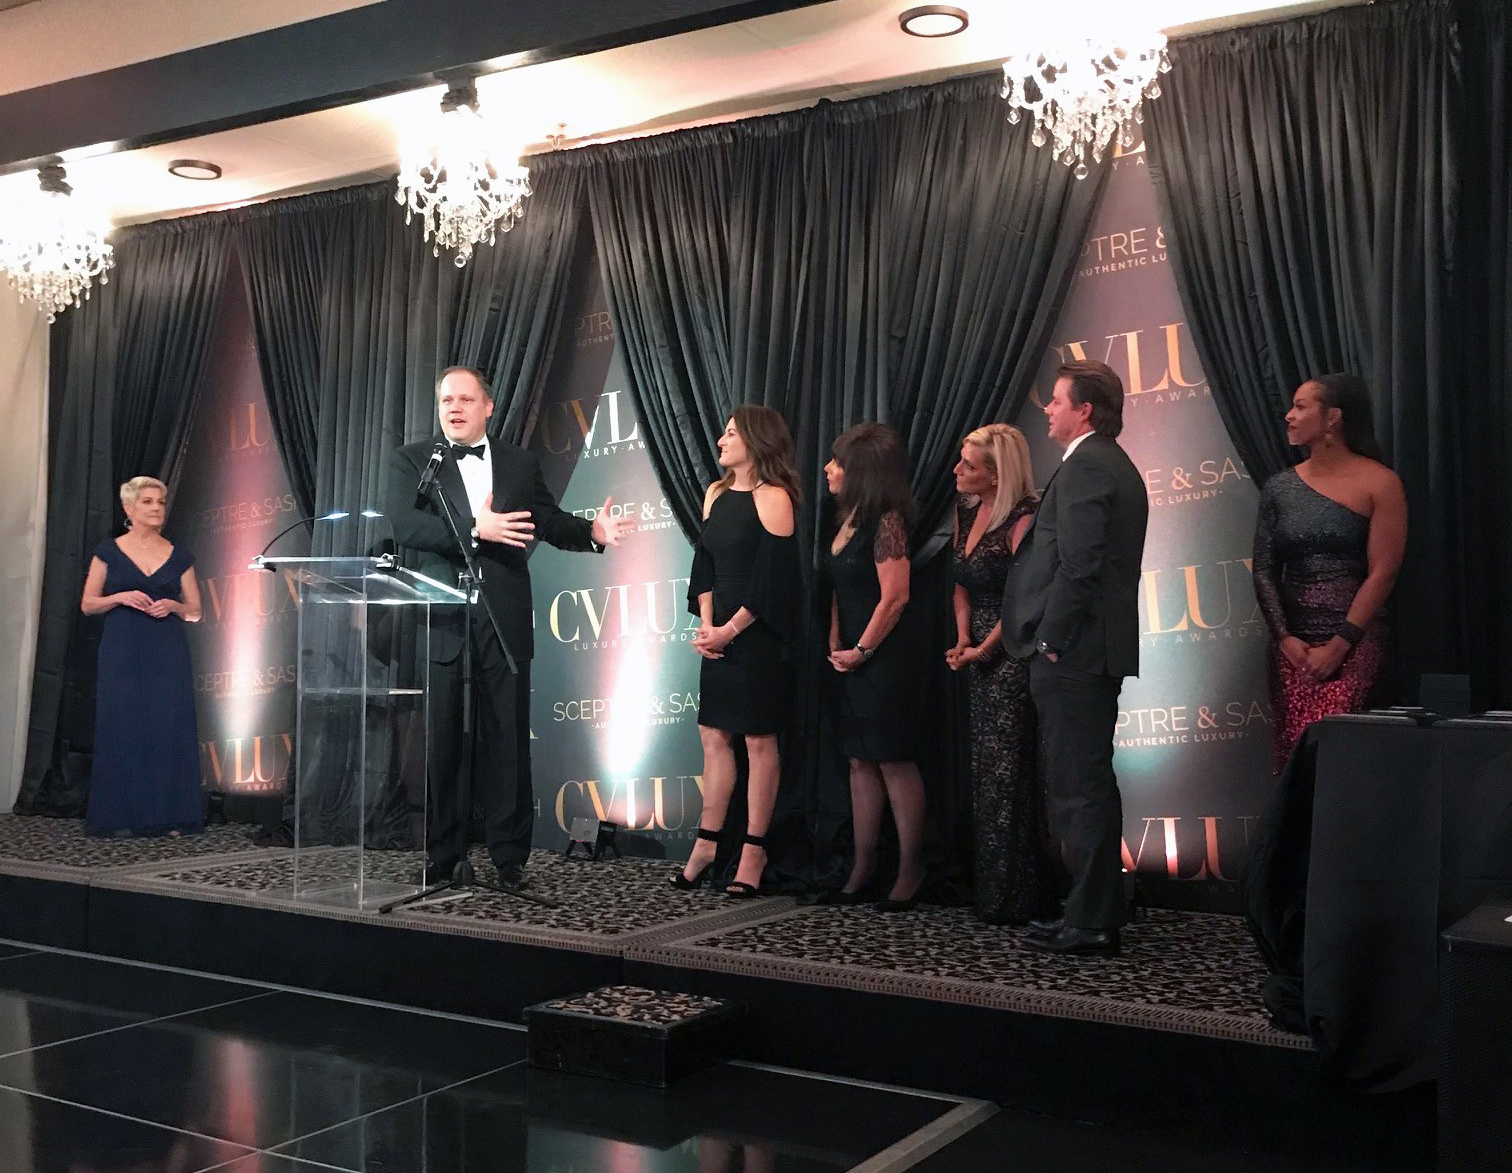 The McCaffrey Homes team received CVLUX’s coveted Diamond Awards, presented to five businesses and individuals who have given back to the community through charitable contributions.